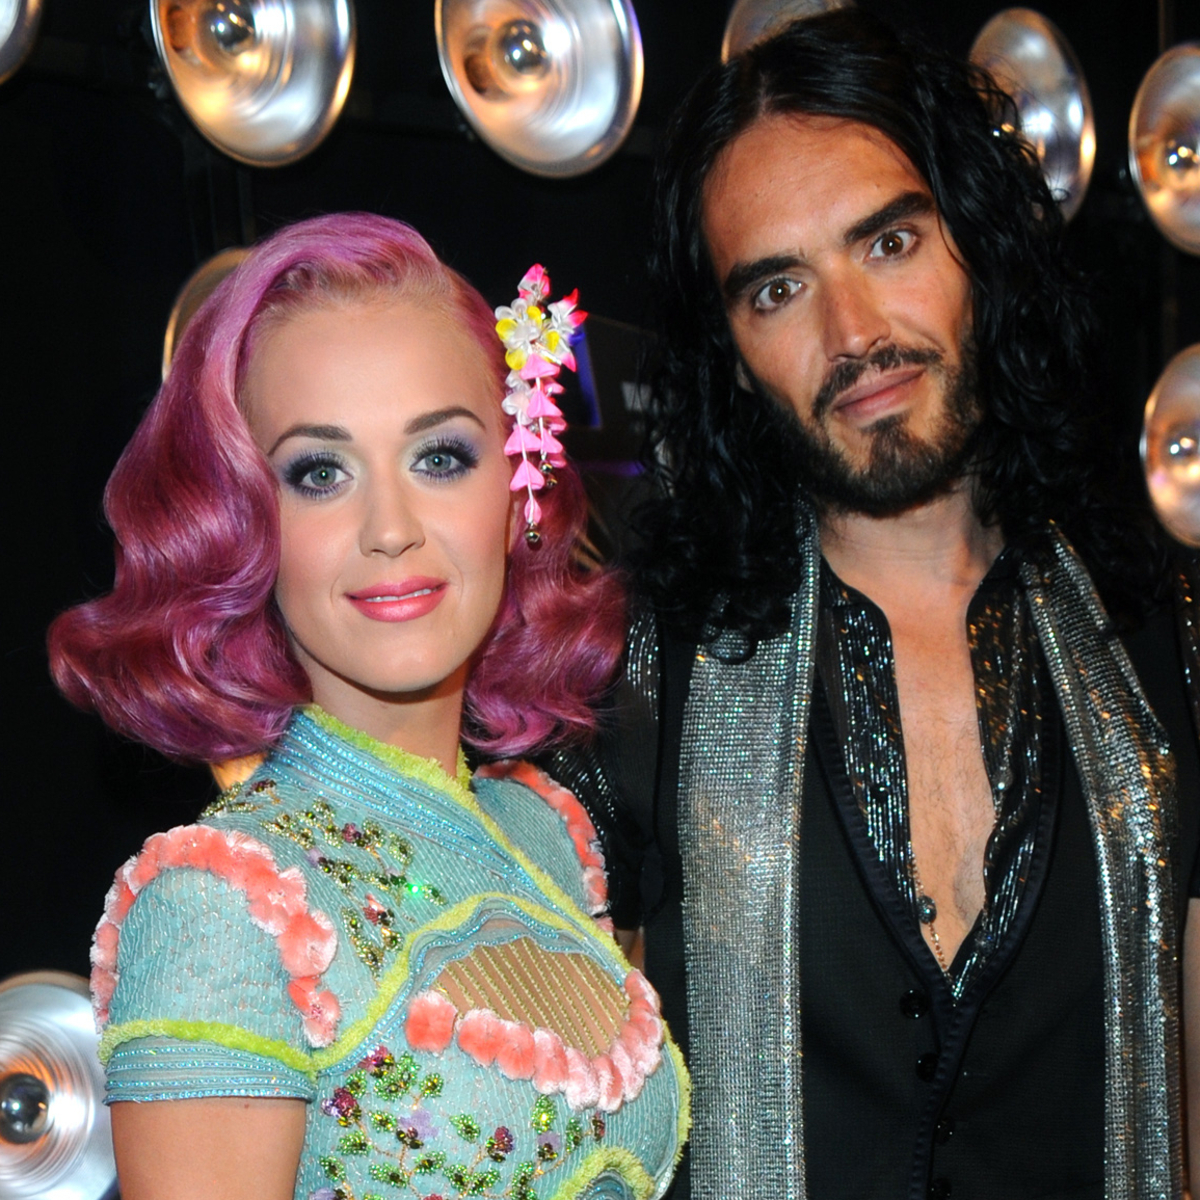 Russell Brand Describes “Chaotic” Time Being Married to Katy Perry